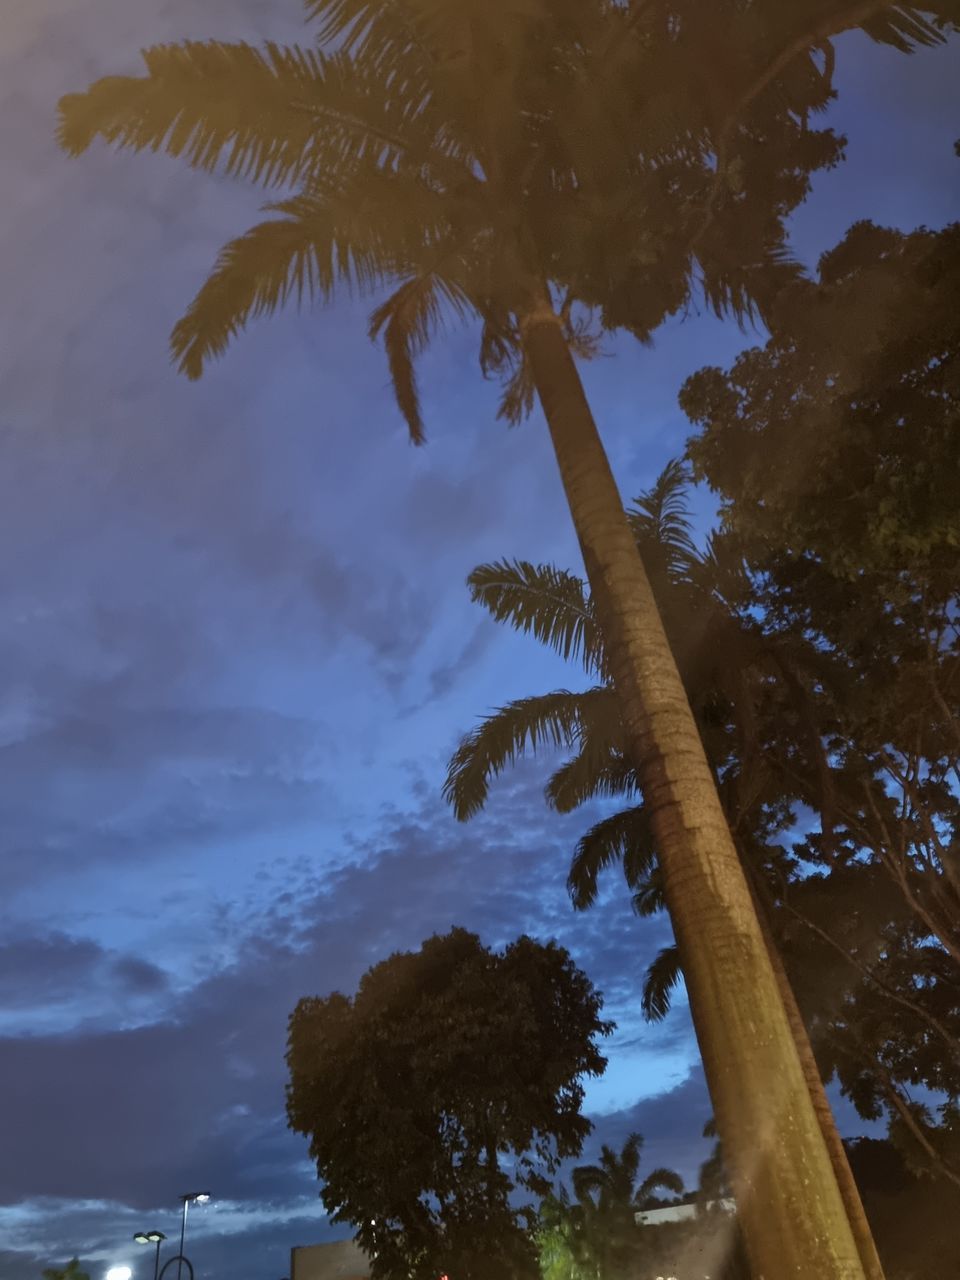 tree, plant, sky, nature, palm tree, tropical climate, reflection, cloud, no people, leaf, beauty in nature, sunlight, outdoors, land, tree trunk, scenics - nature, growth, water, tranquility, trunk, branch, low angle view, travel destinations, environment, evening